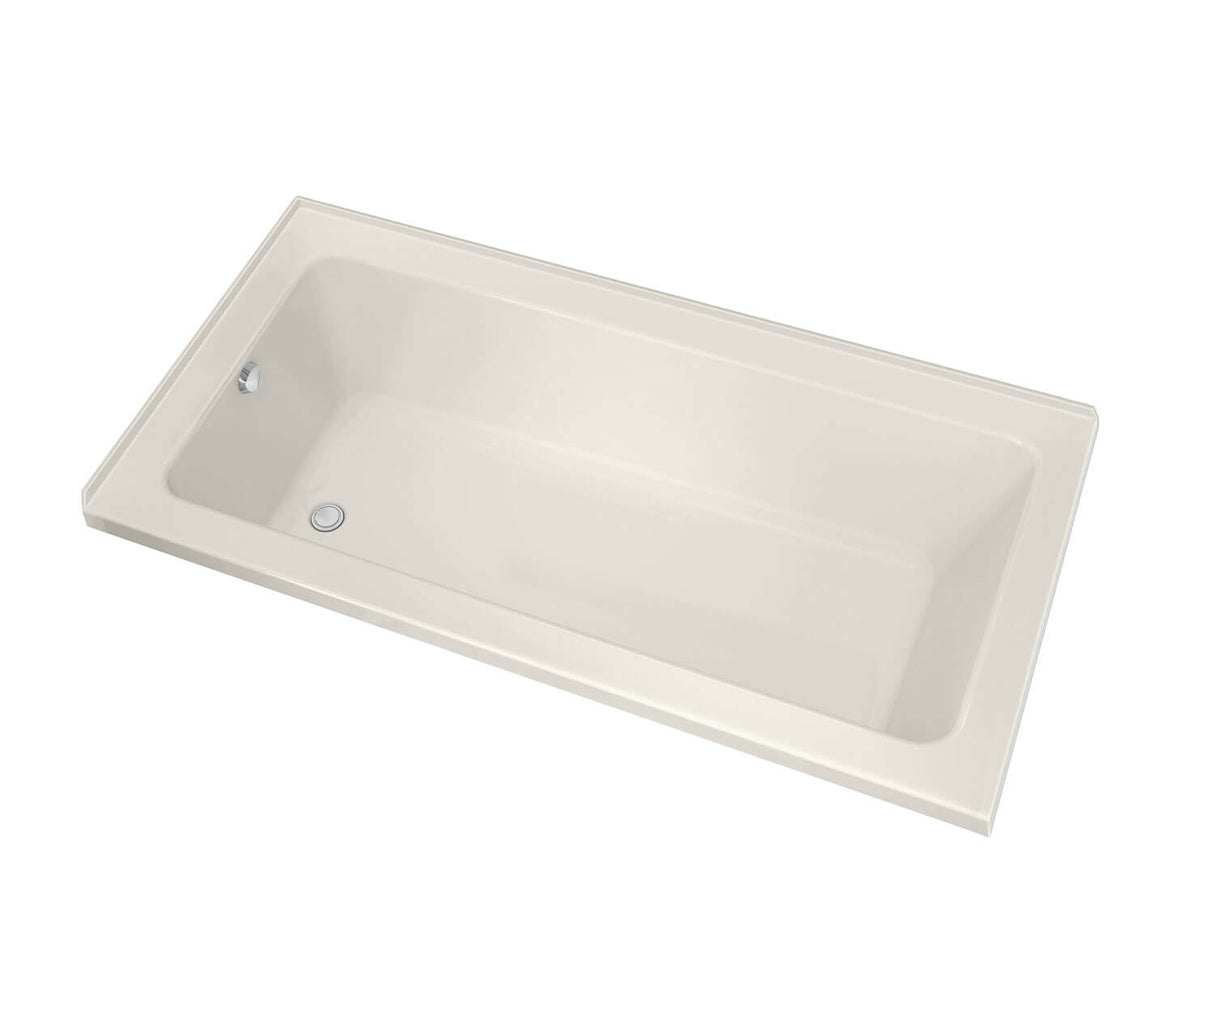 MAAX 106202-R-103-007 Pose 6032 IF Acrylic Corner Left Right-Hand Drain Aeroeffect Bathtub in Biscuit